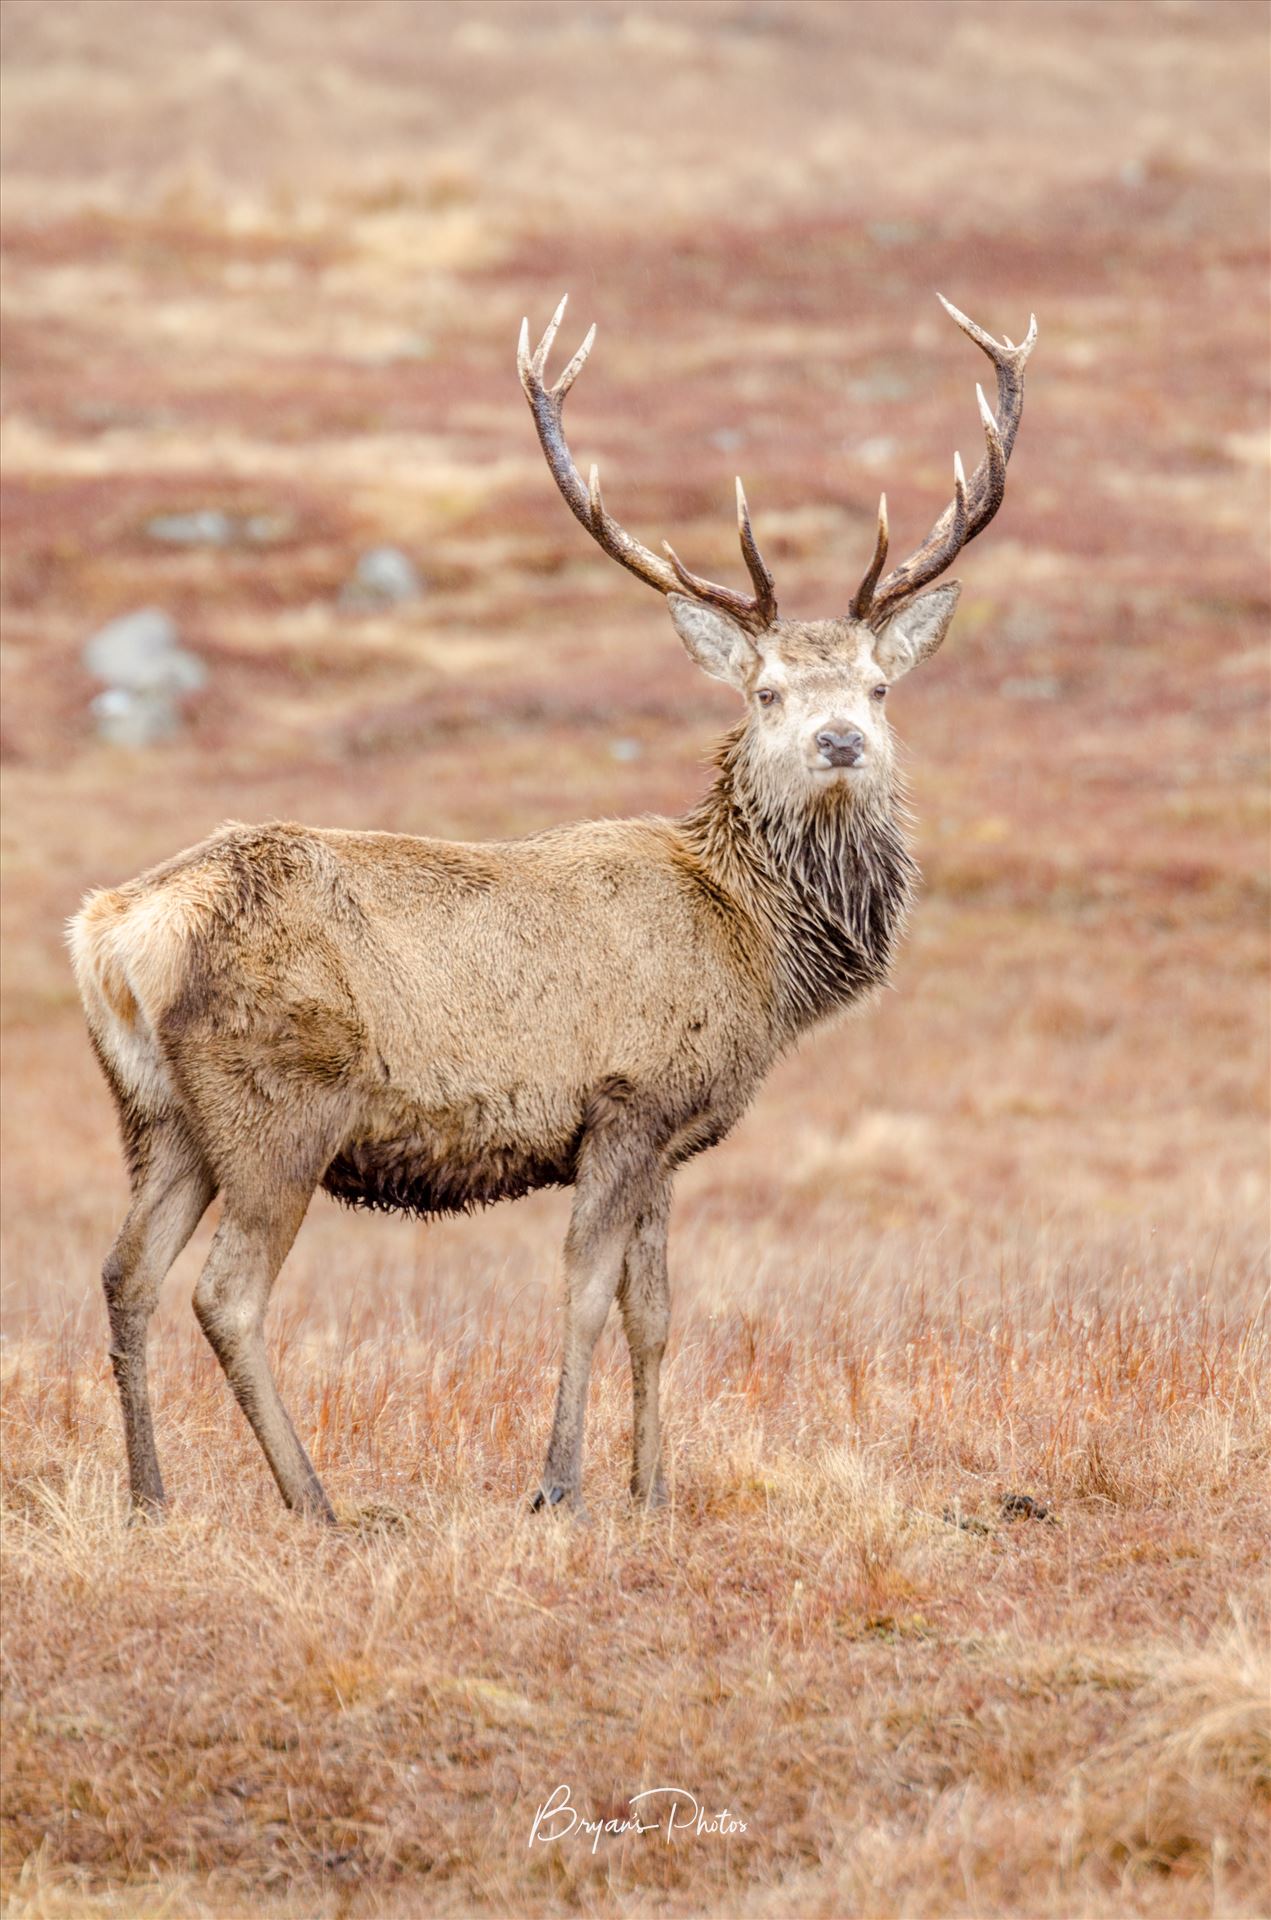 Highland Deer A photograph of a lone Stag taken in Glen Lyon in the Scottish Highlands. by Bryans Photos